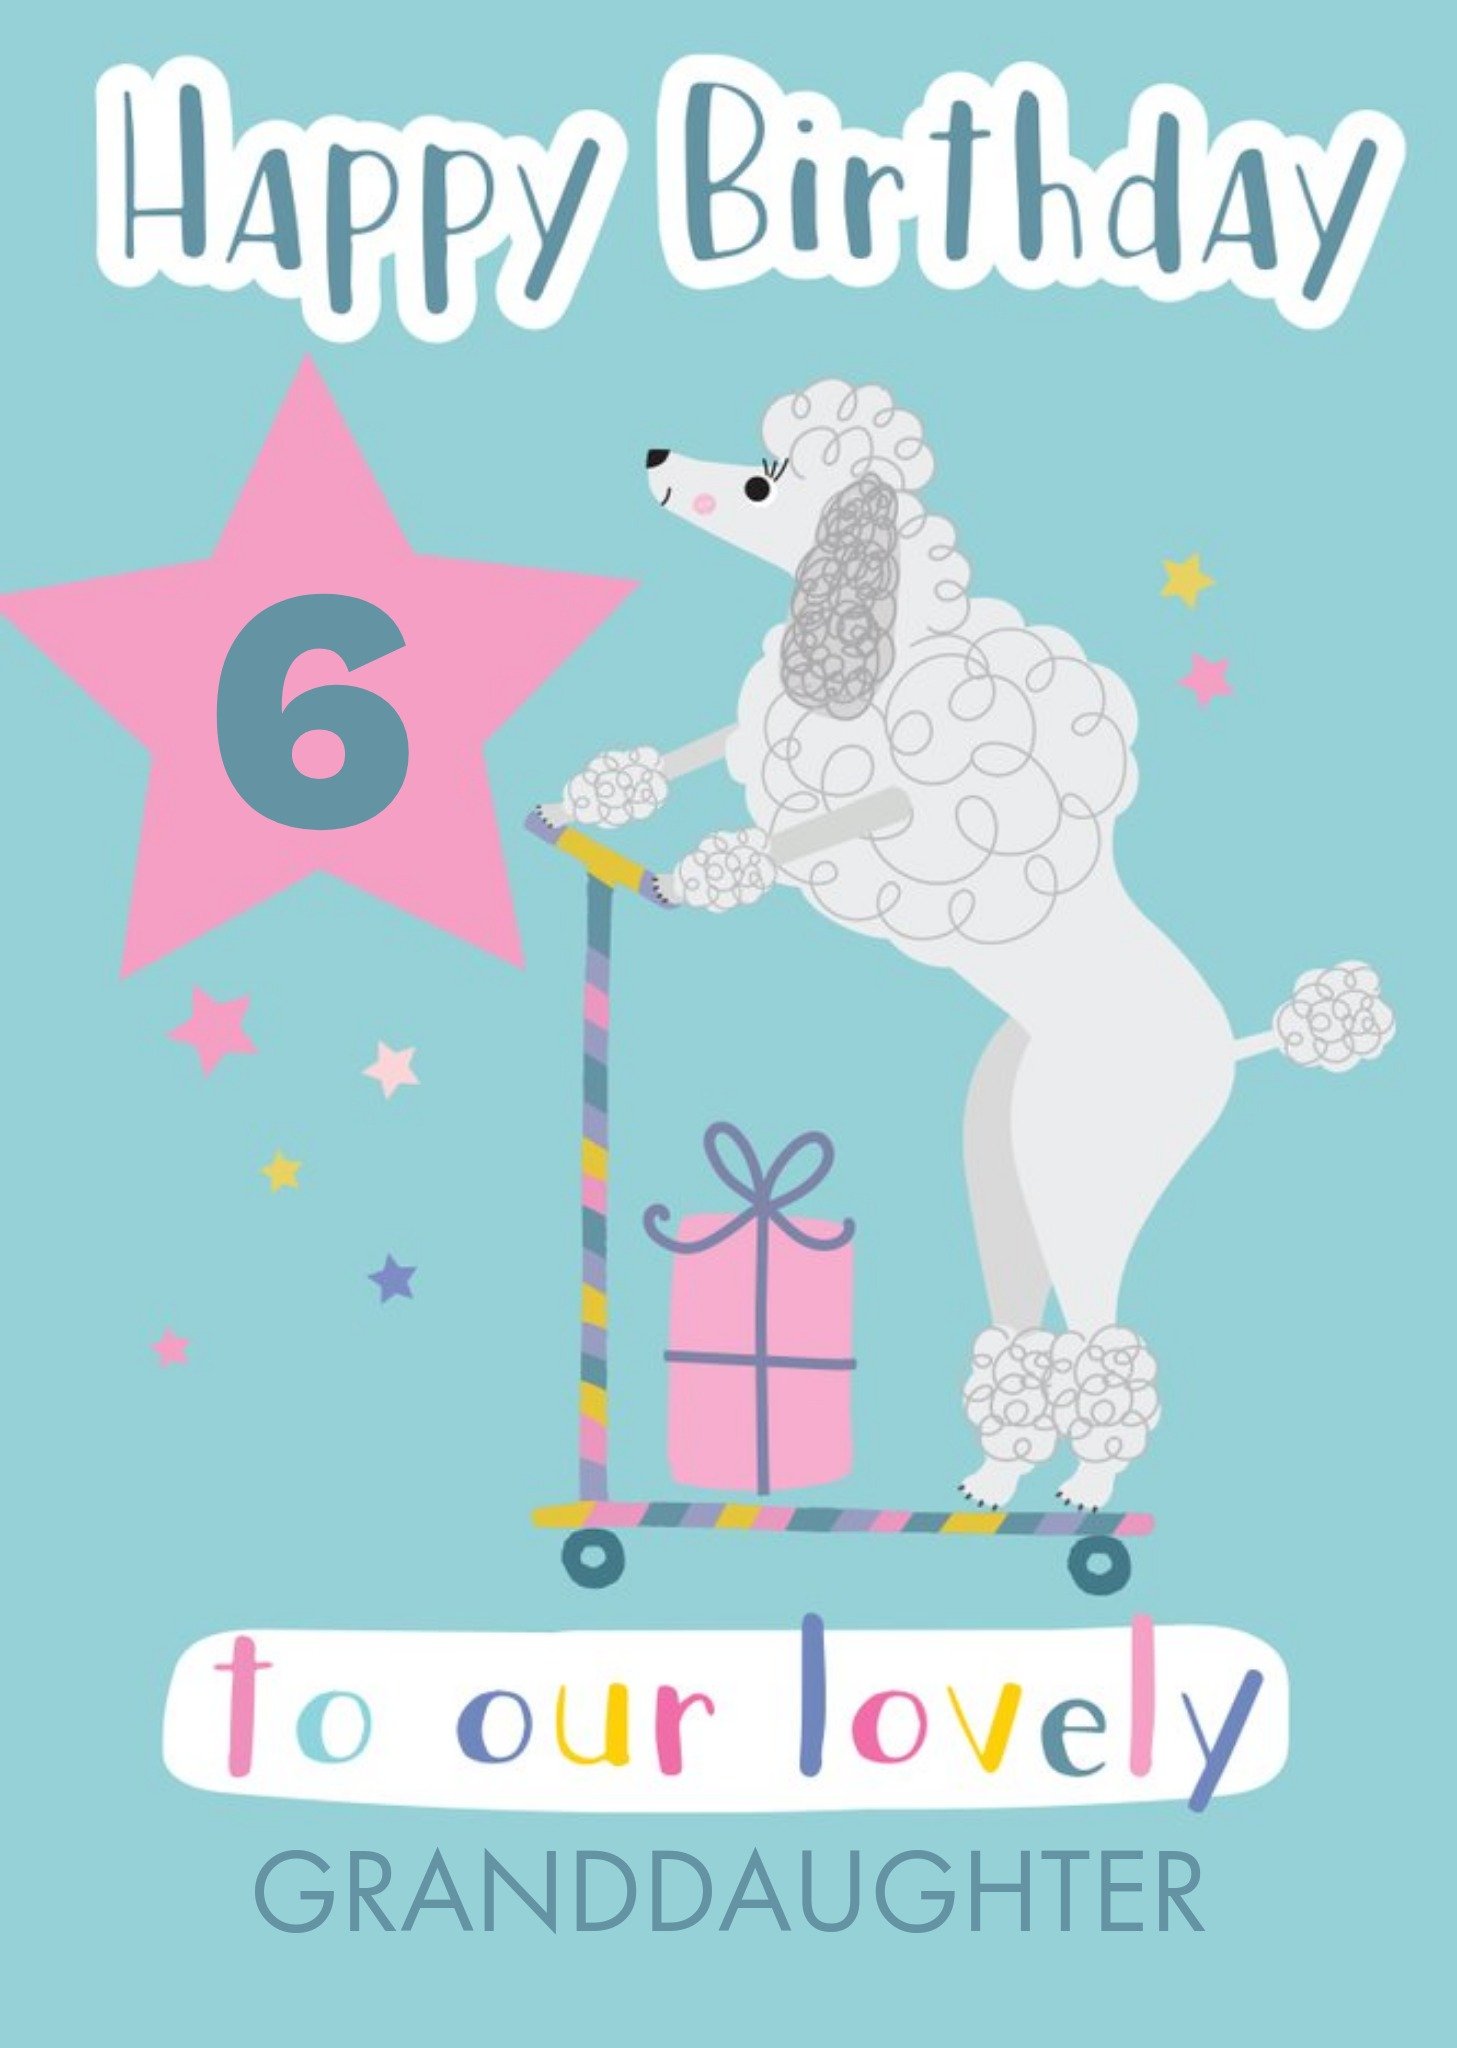 Moonpig Cute French Poodle Illustration Personalised Graddaughter Birthday Card, Large